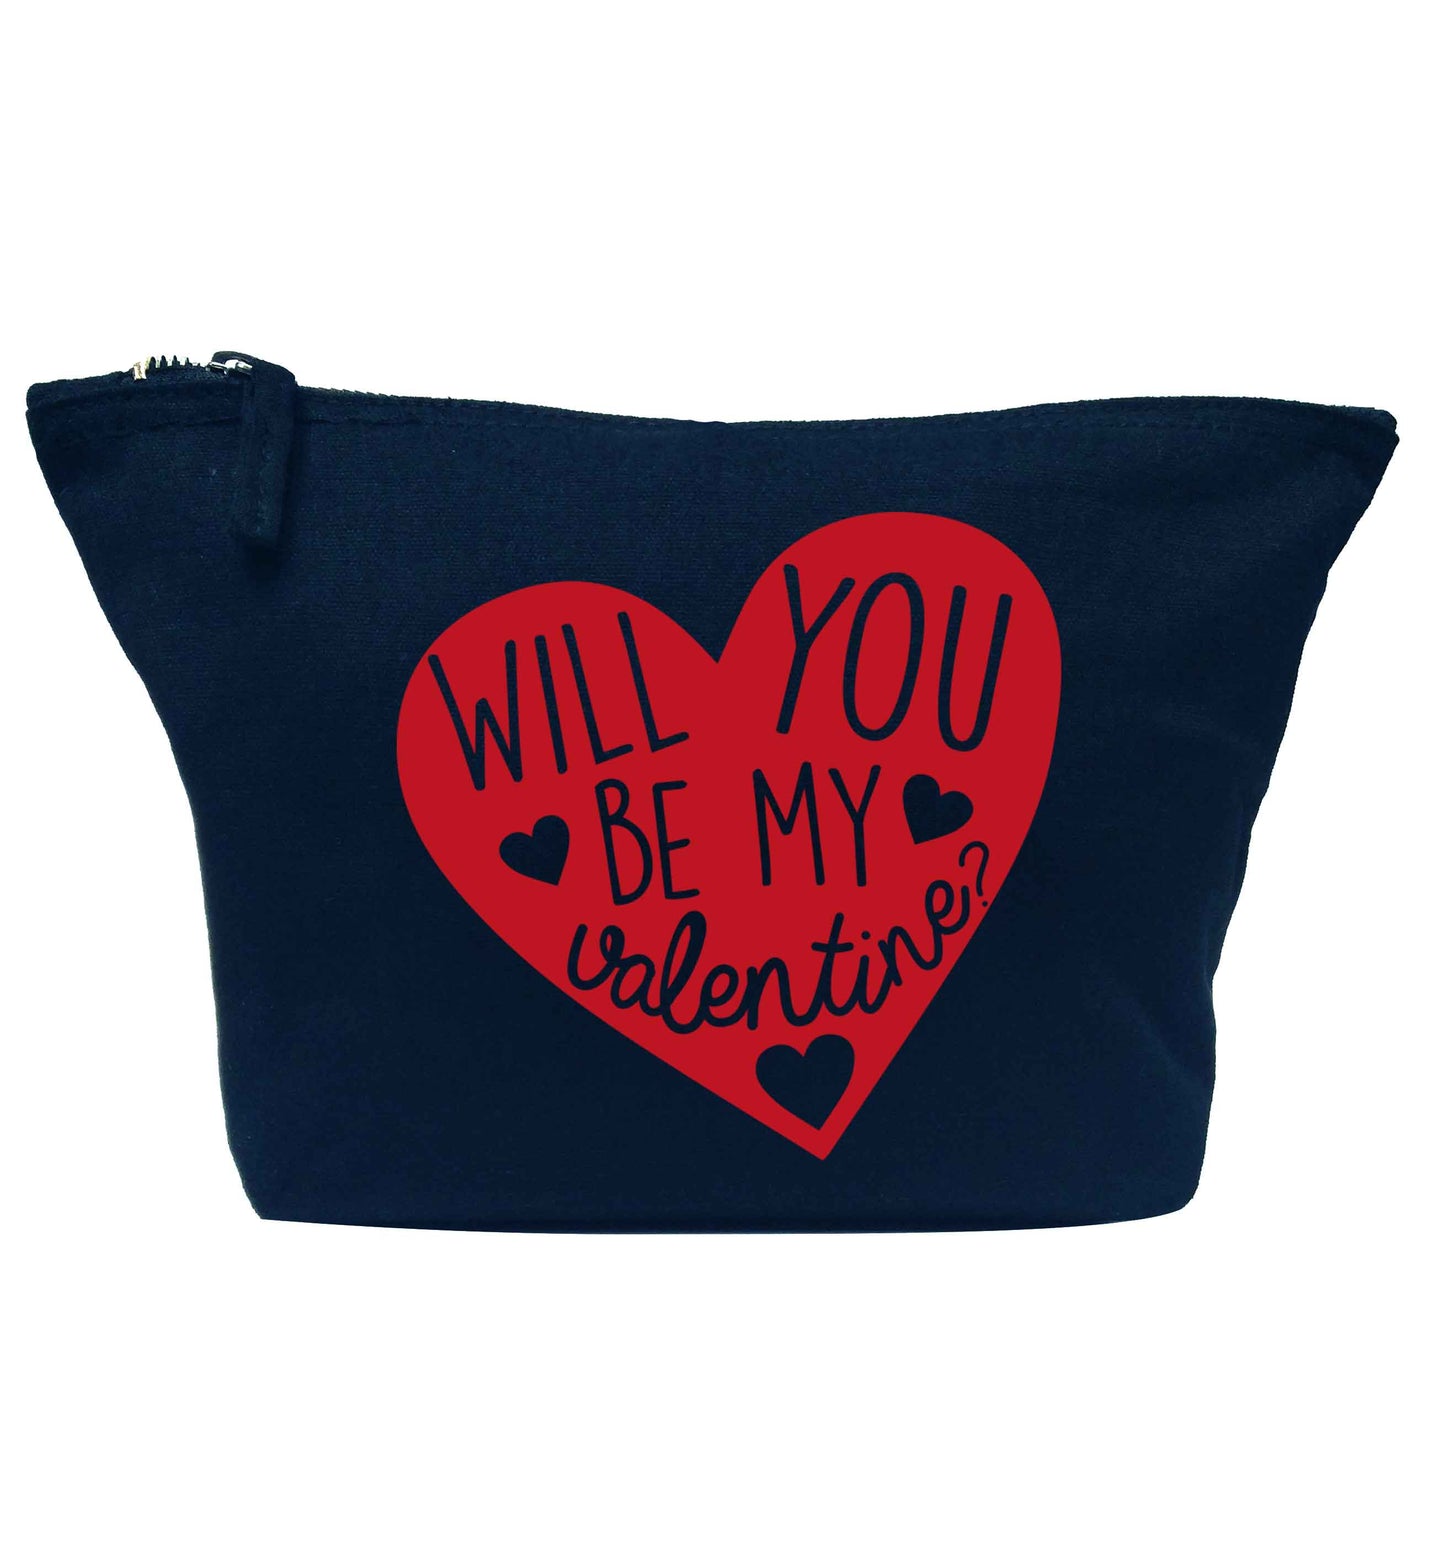 Will you be my valentine? navy makeup bag